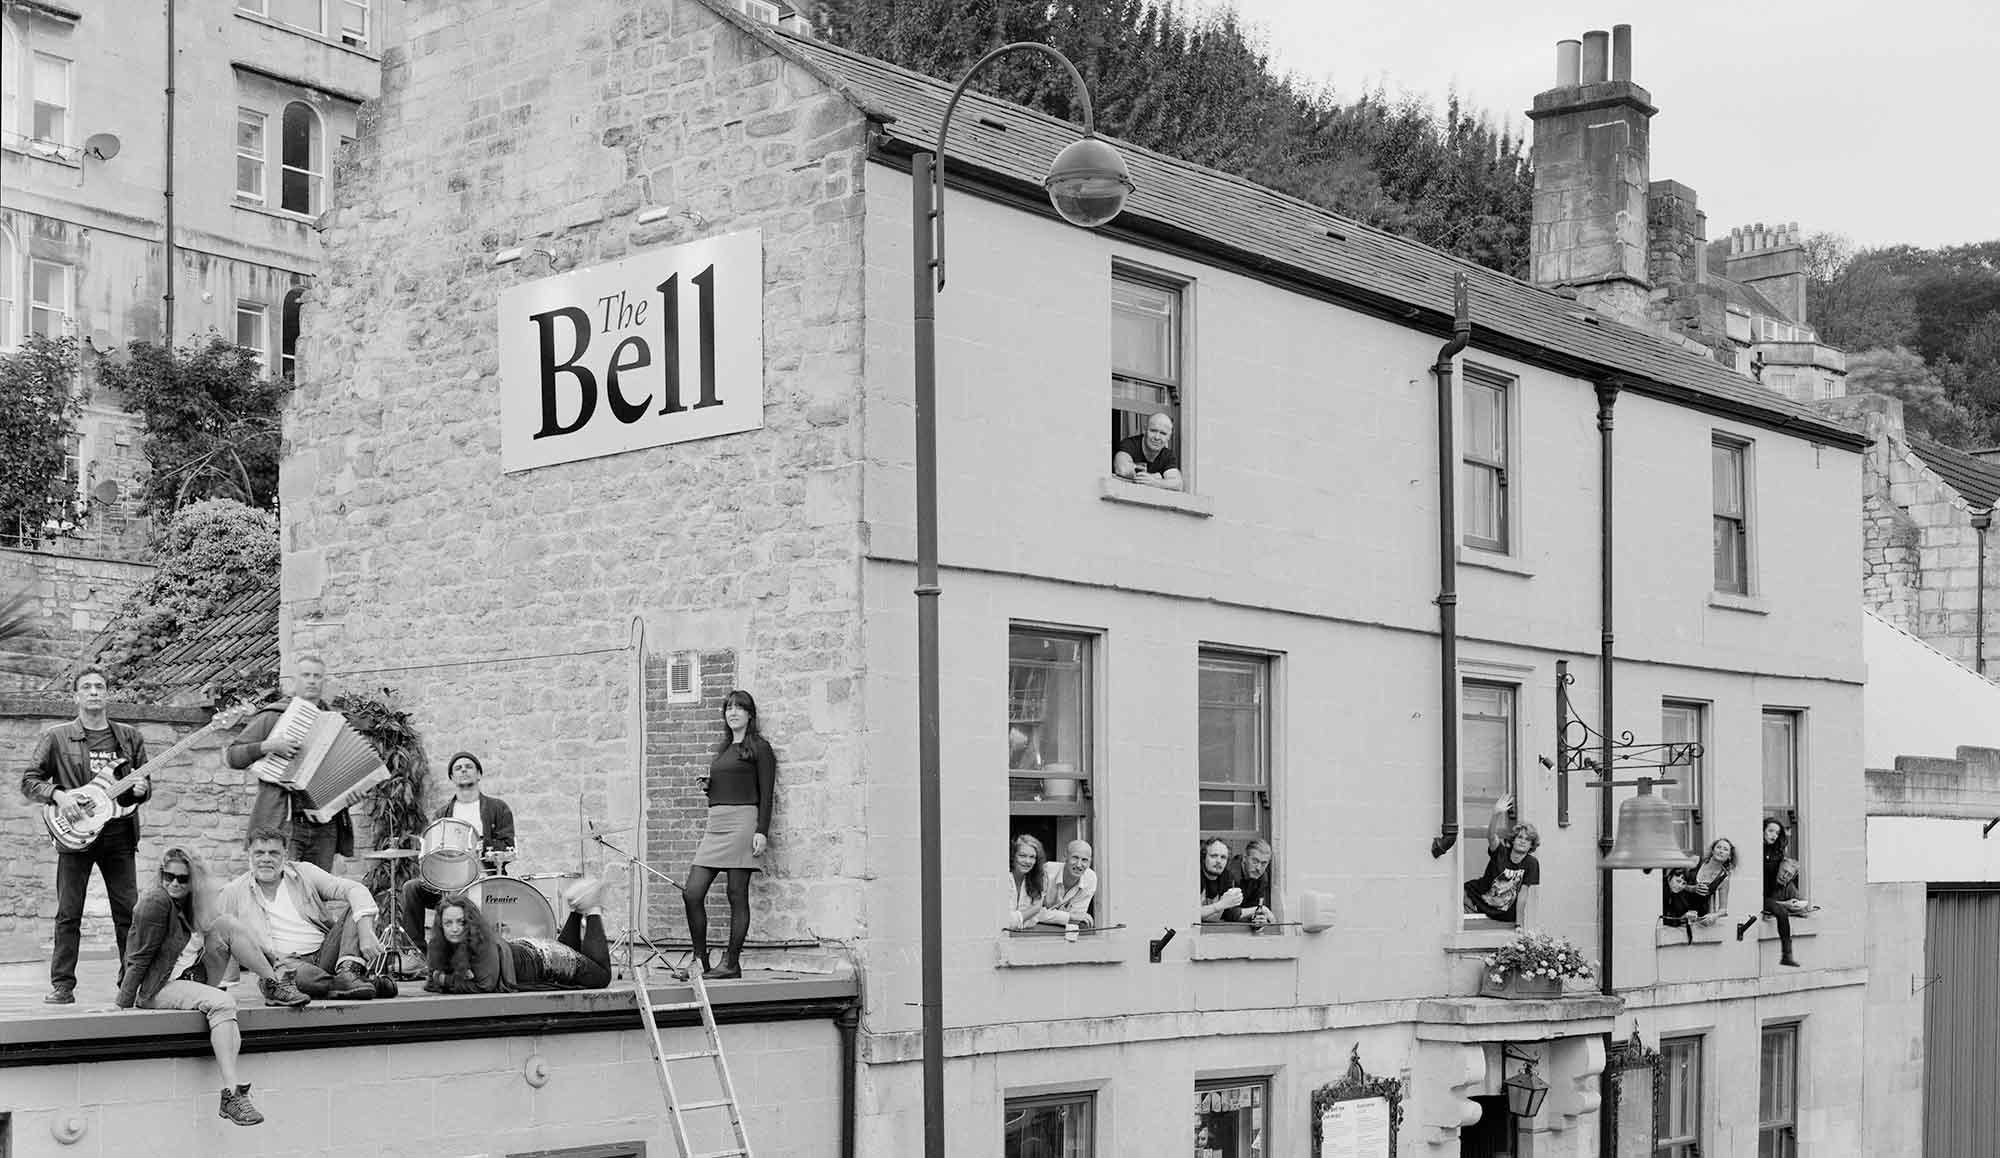 The Bell pub Bath showing the side and front of the building. People are poking through the windows who appear to work at the pub. People on the roof next door appear to be a band with musical instruments.